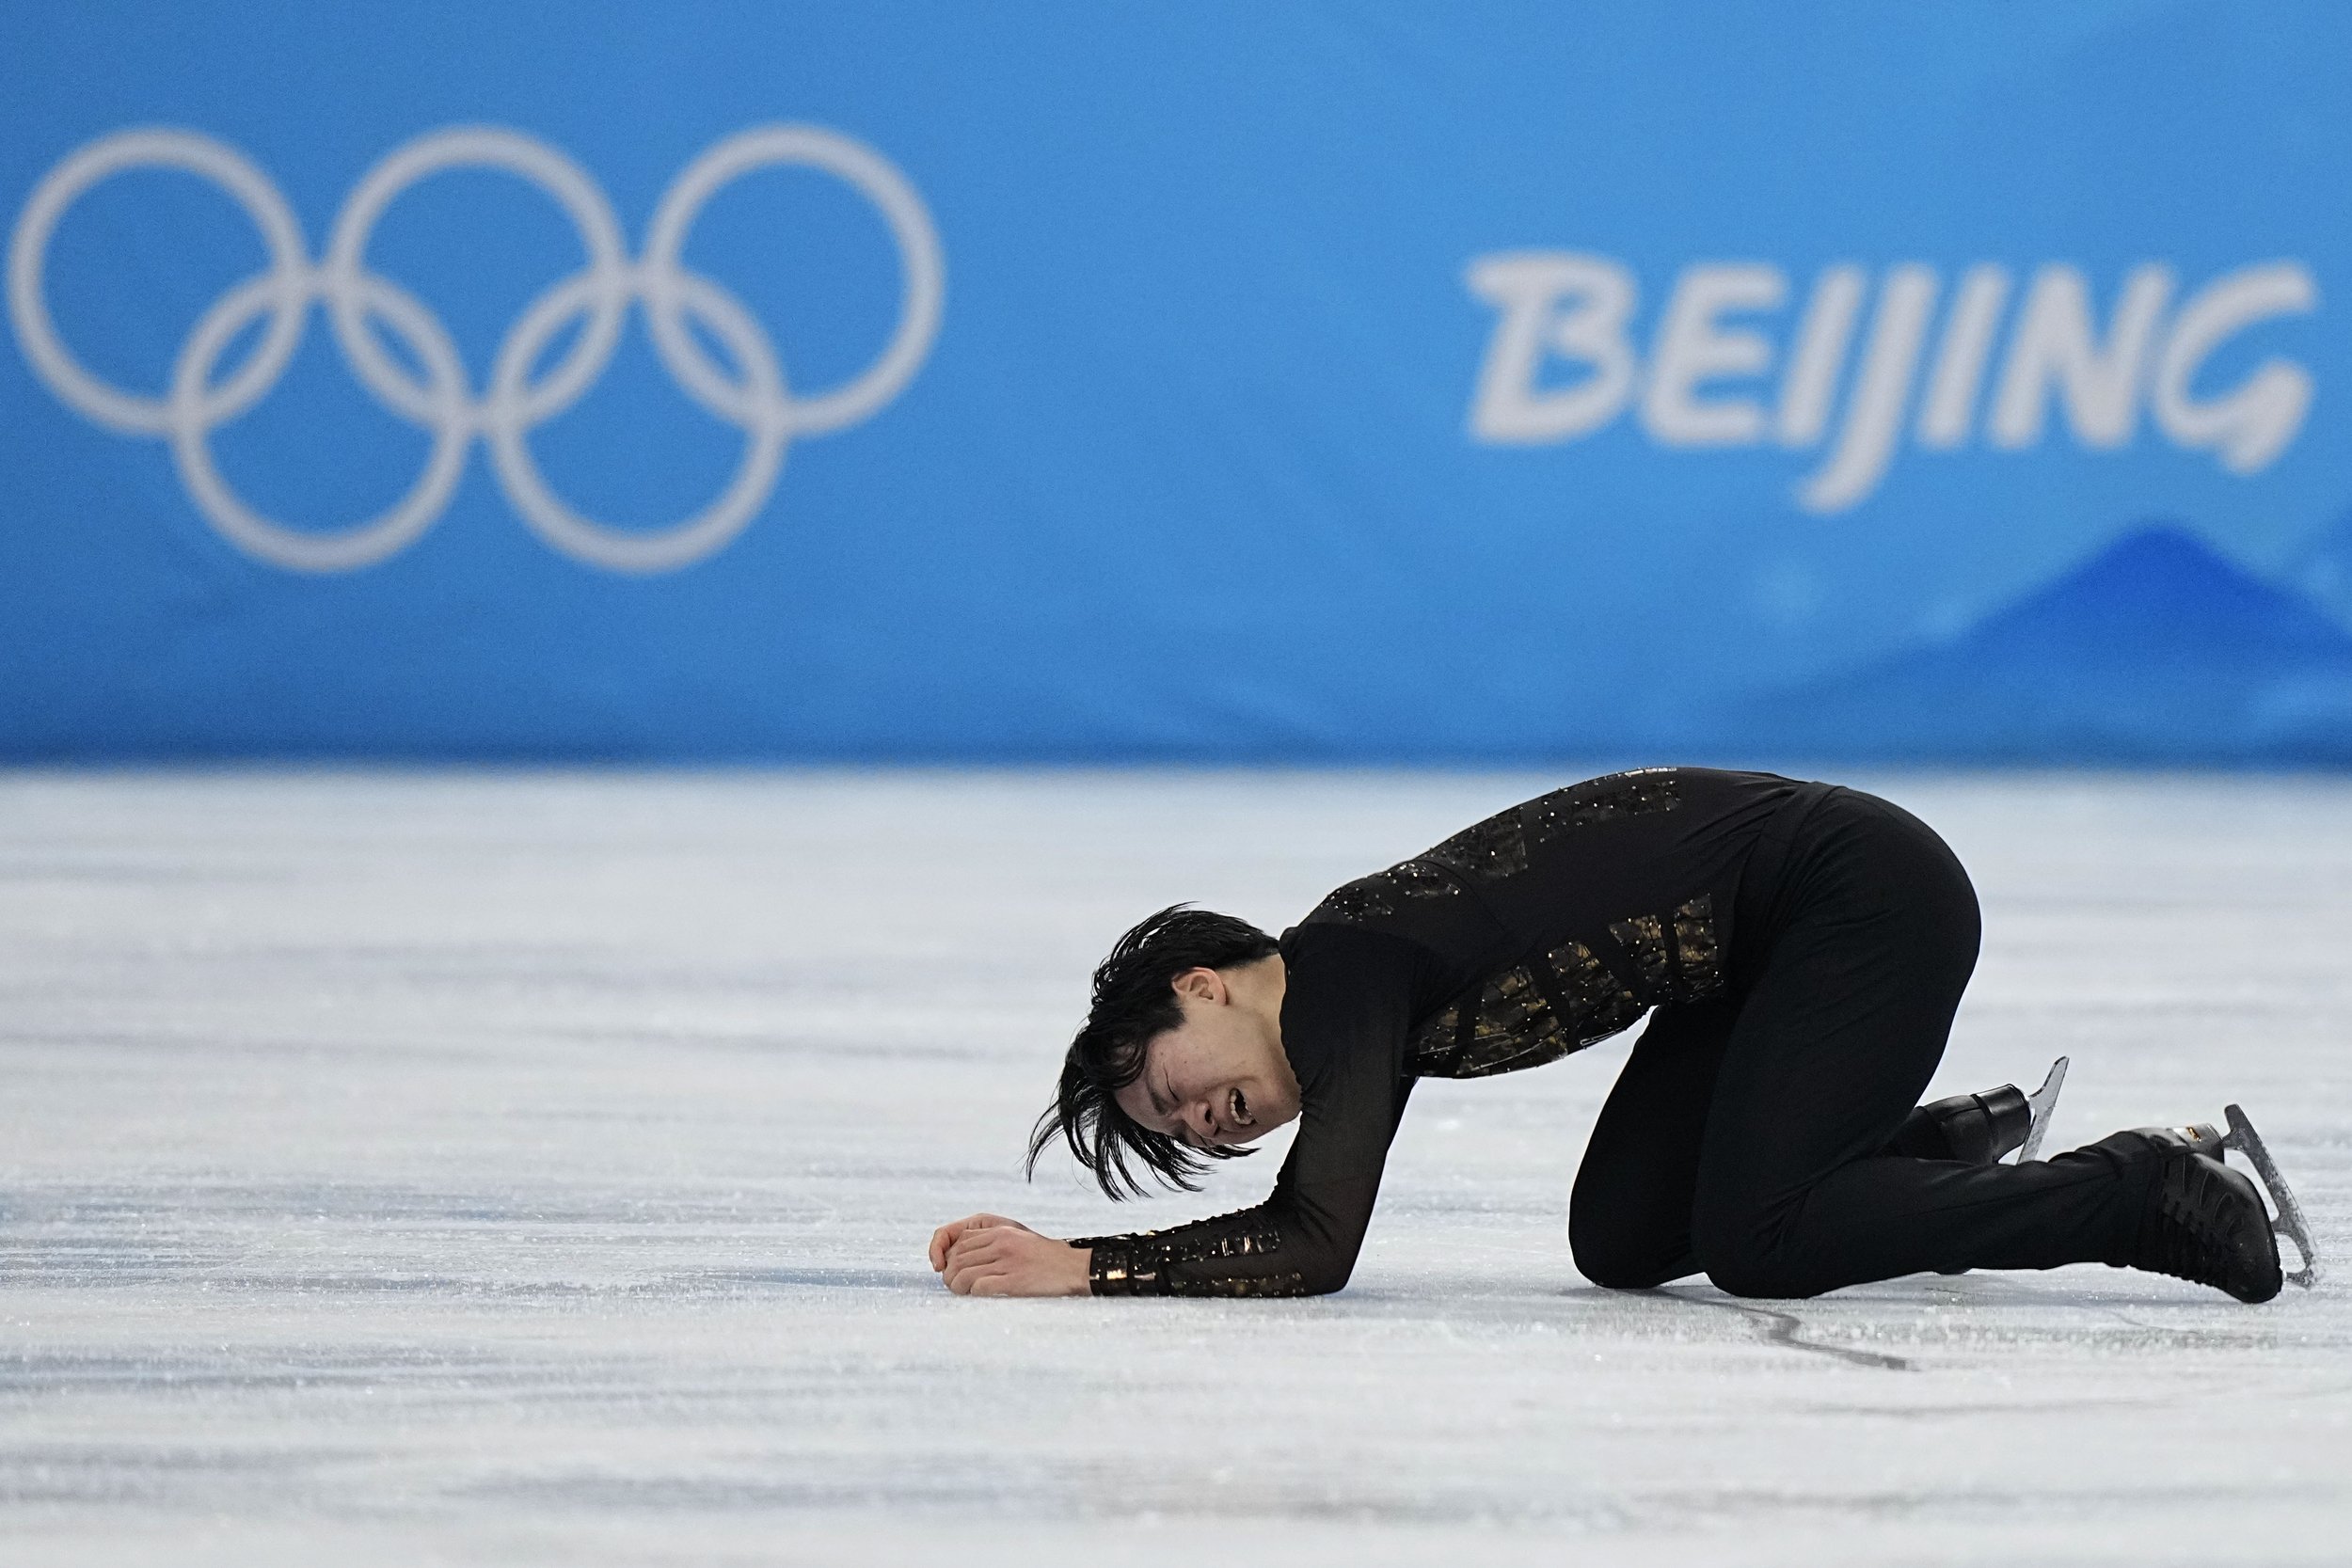  Yuma Kagiyama, of Japan, reacts after competing in the men's free skate program during the figure skating event at the 2022 Winter Olympics, Thursday, Feb. 10, 2022, in Beijing. (AP Photo/David J. Phillip) 